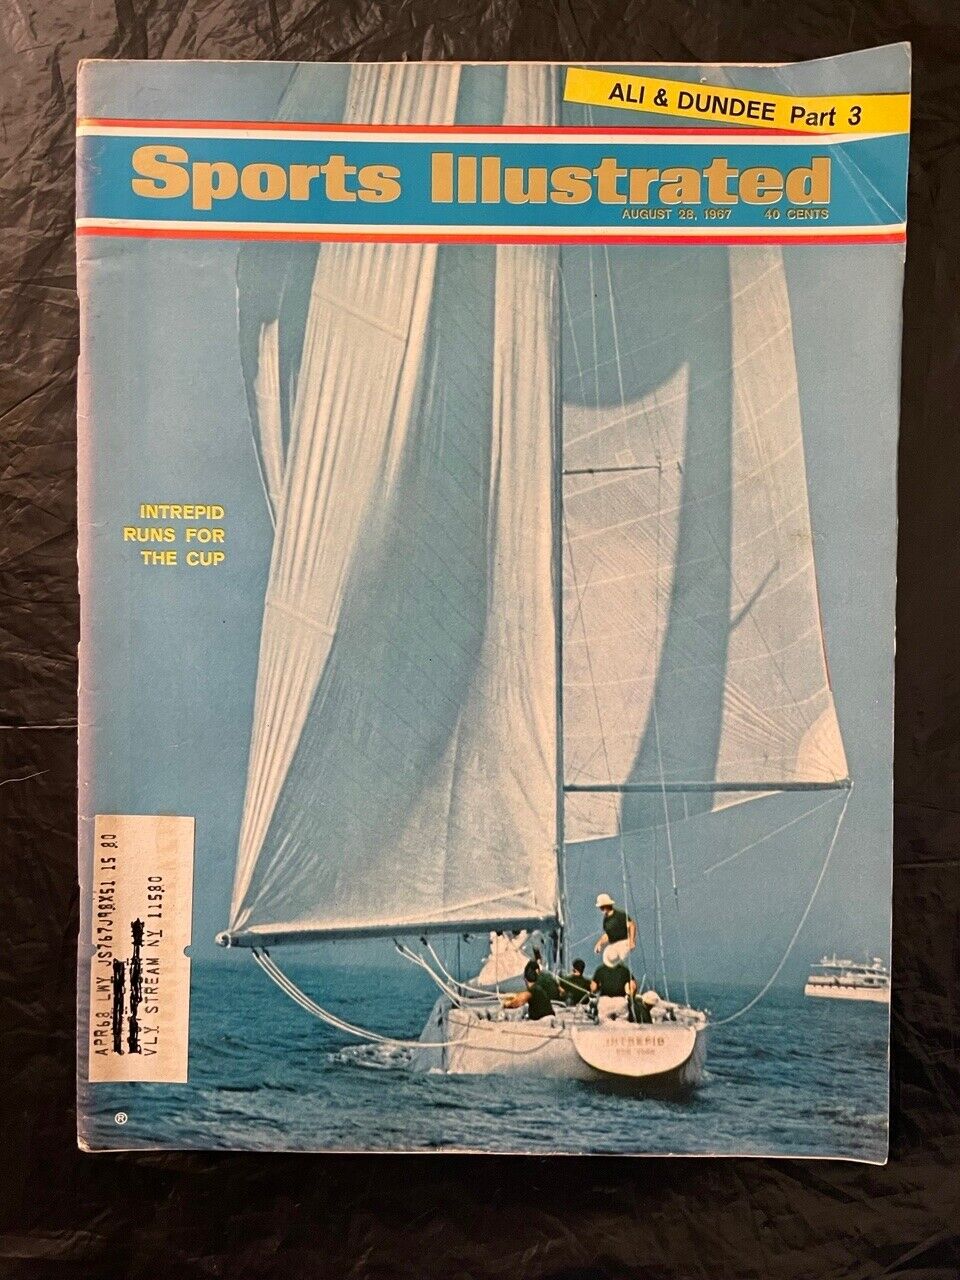 Sports Illustrated - August 28, 1967 - Americaand#039;s Cup